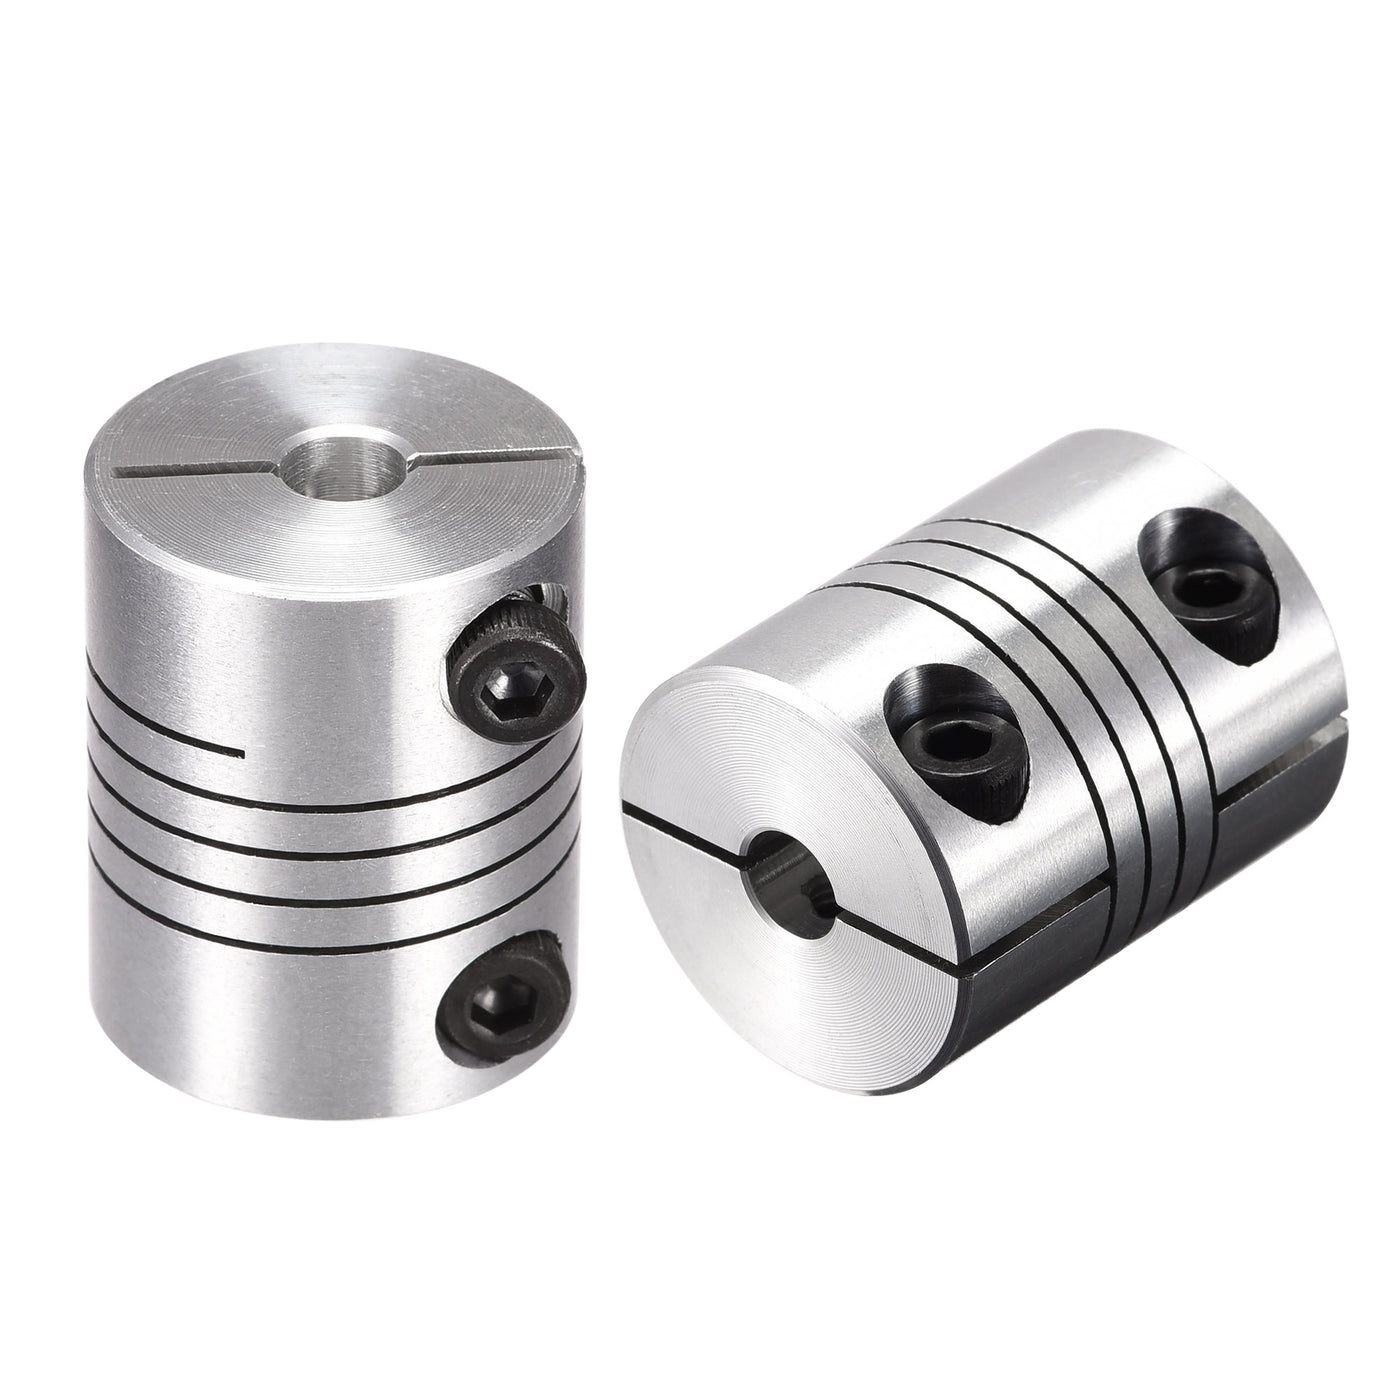 uxcell Uxcell 2PCS Motor Shaft 5mm to 6.35mm Helical Beam Coupler Coupling 25mm Dia 30mm Long